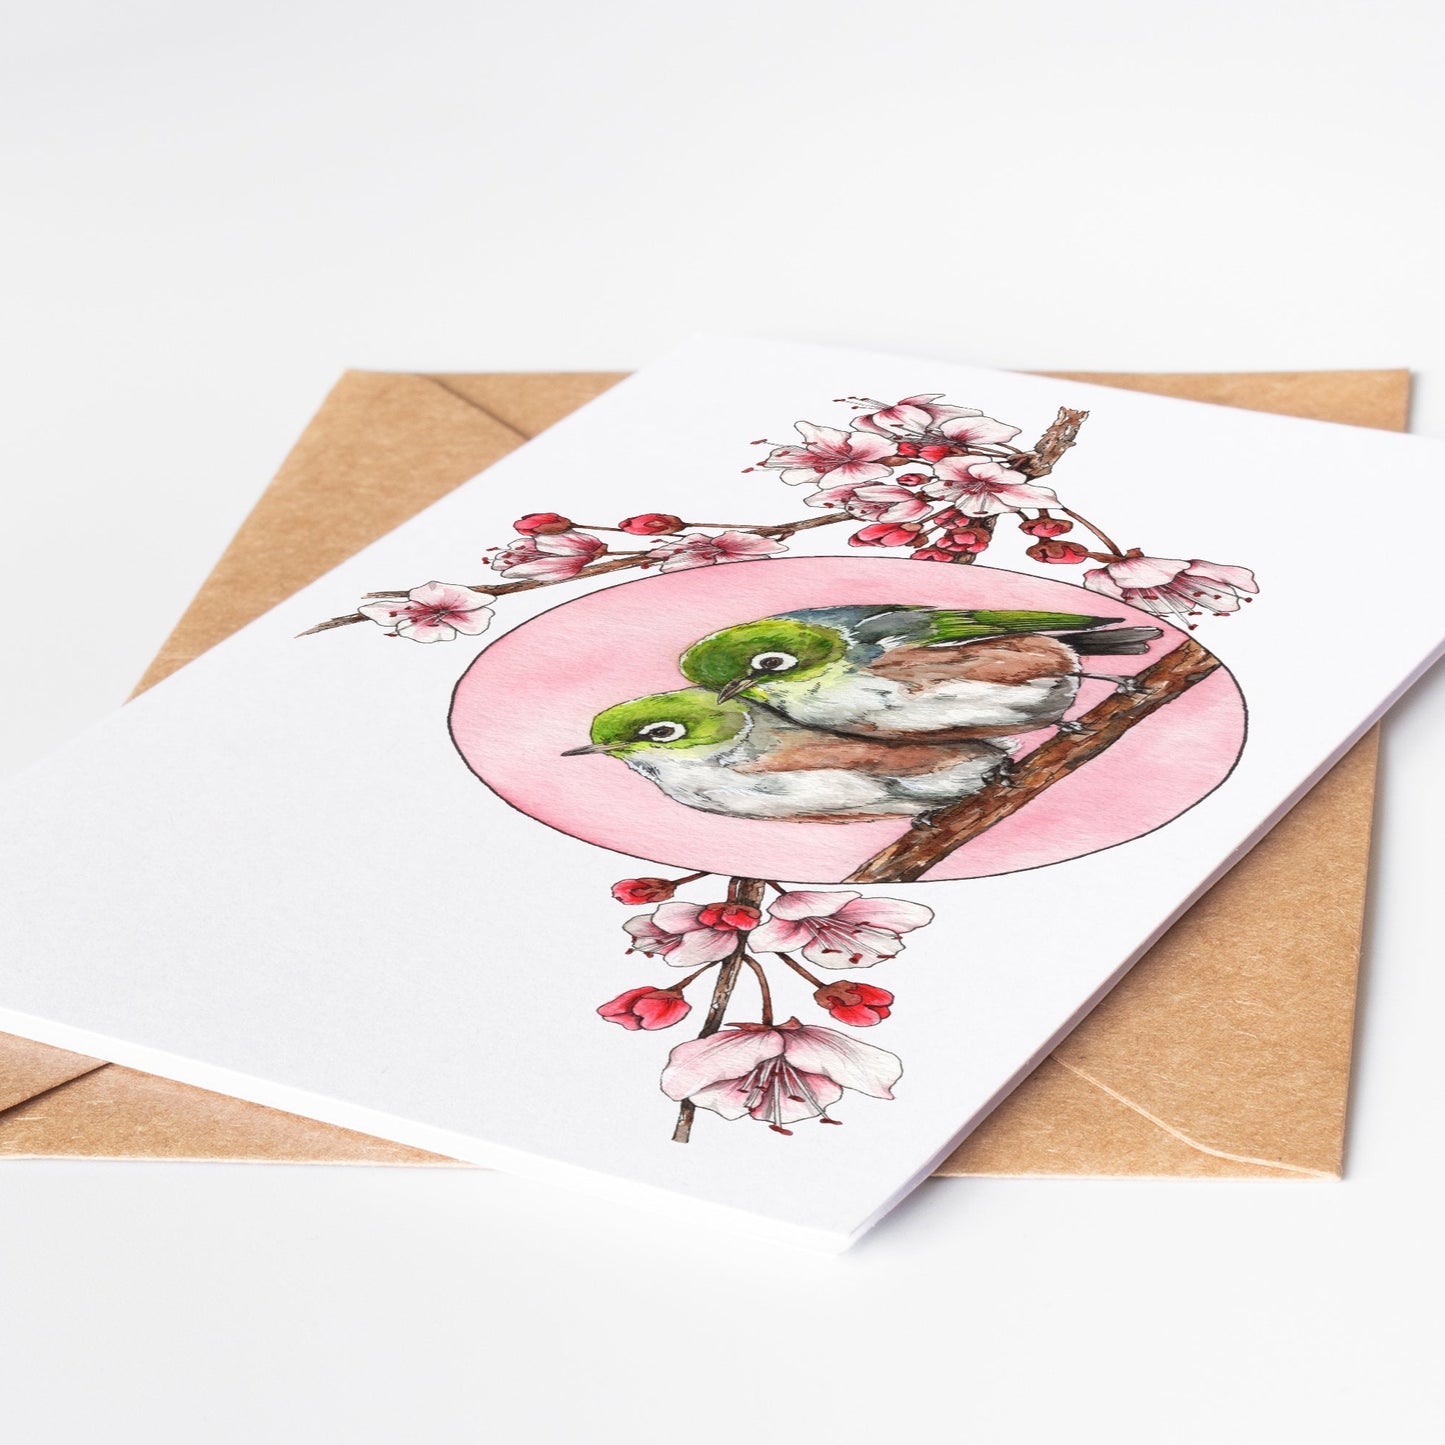 Greeting card by artist Leah Ingram featuring 2 Silvereye birds nestled together on a branch surrounded by pink blossoms.